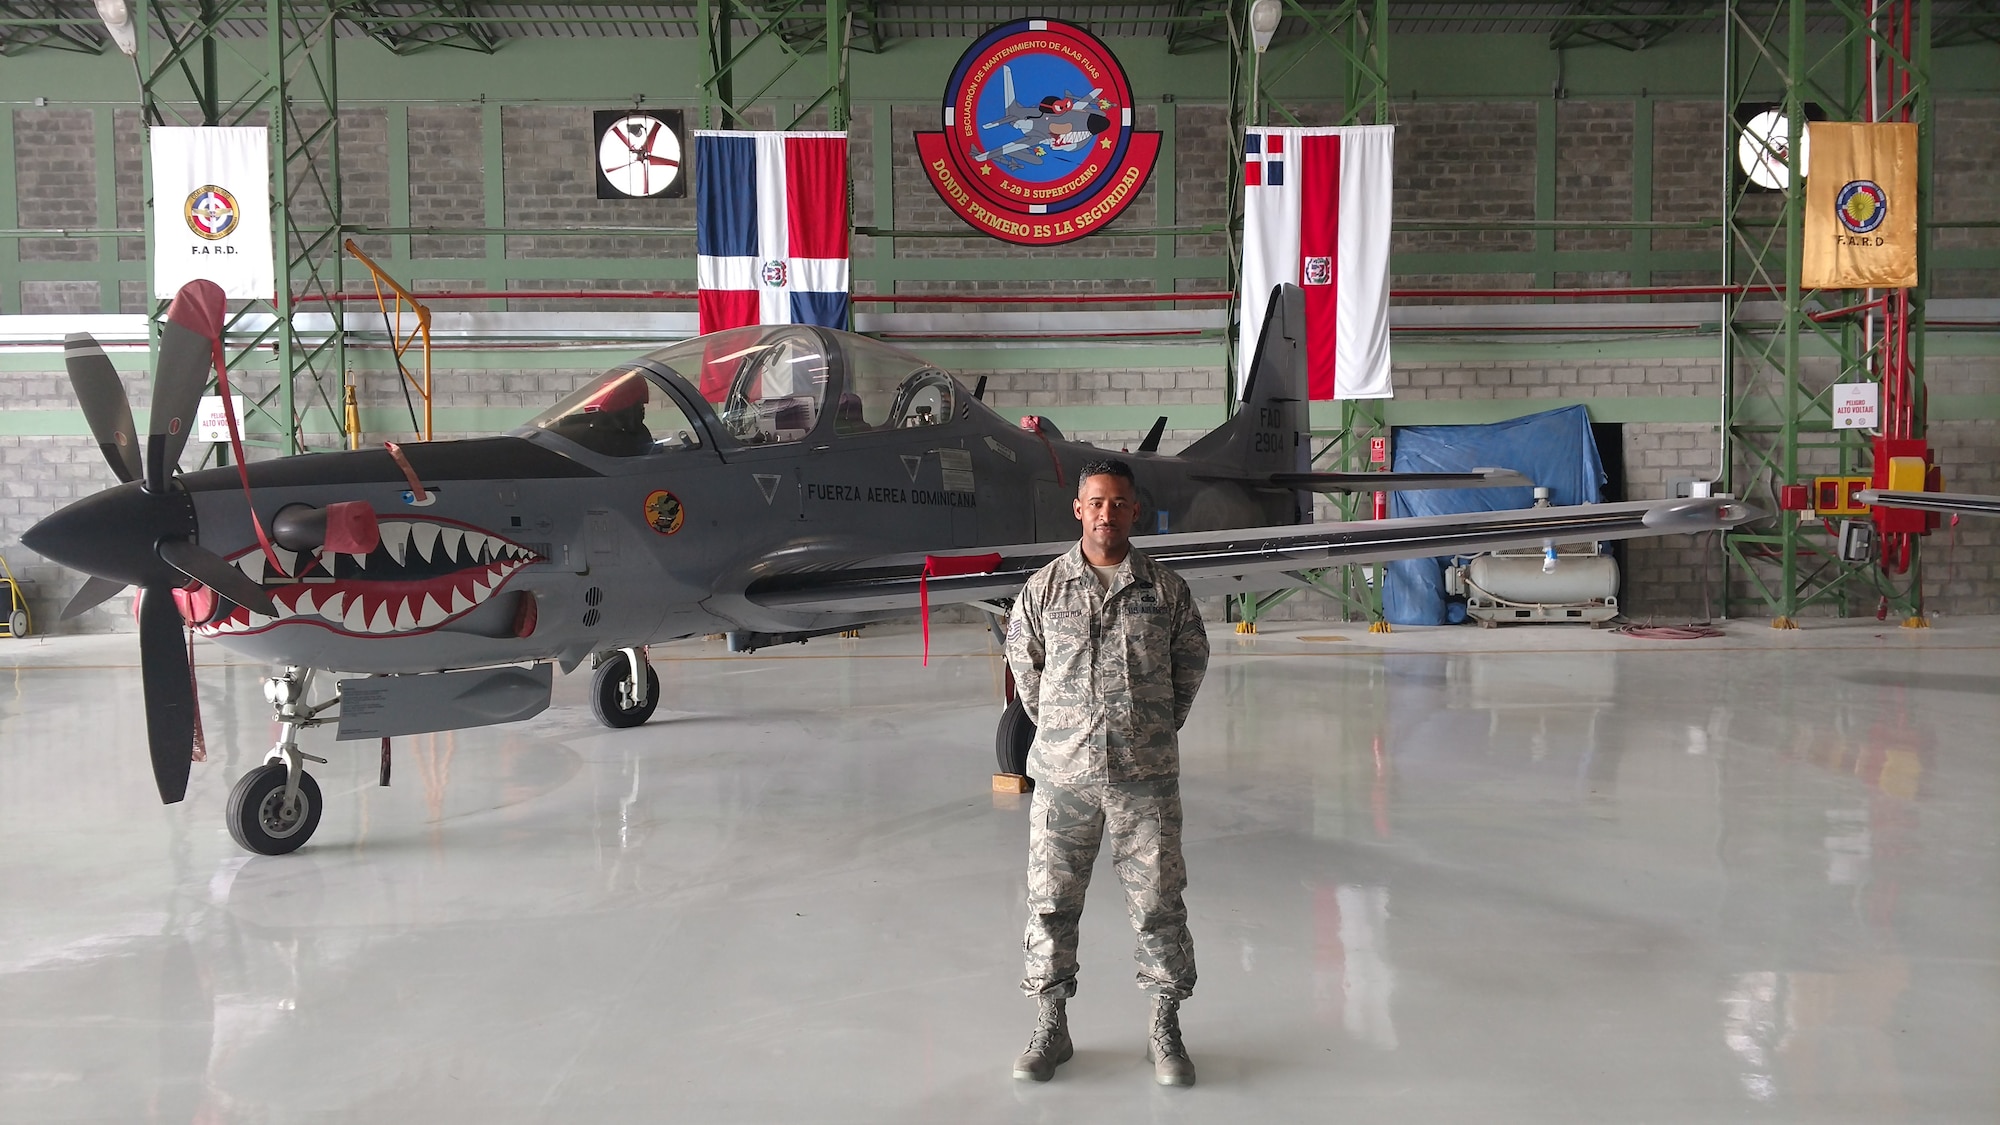 Tech. Sgt. Rafael Escoto Roa, 571st Mobility Support Advisory Squadron air transportation specialist air advisor, poses in-front of an A-29 Super Tucano aircraft, at the San Isidro Air Base in Santo Domingo, Dominican Republic. (Courtesy Photo)